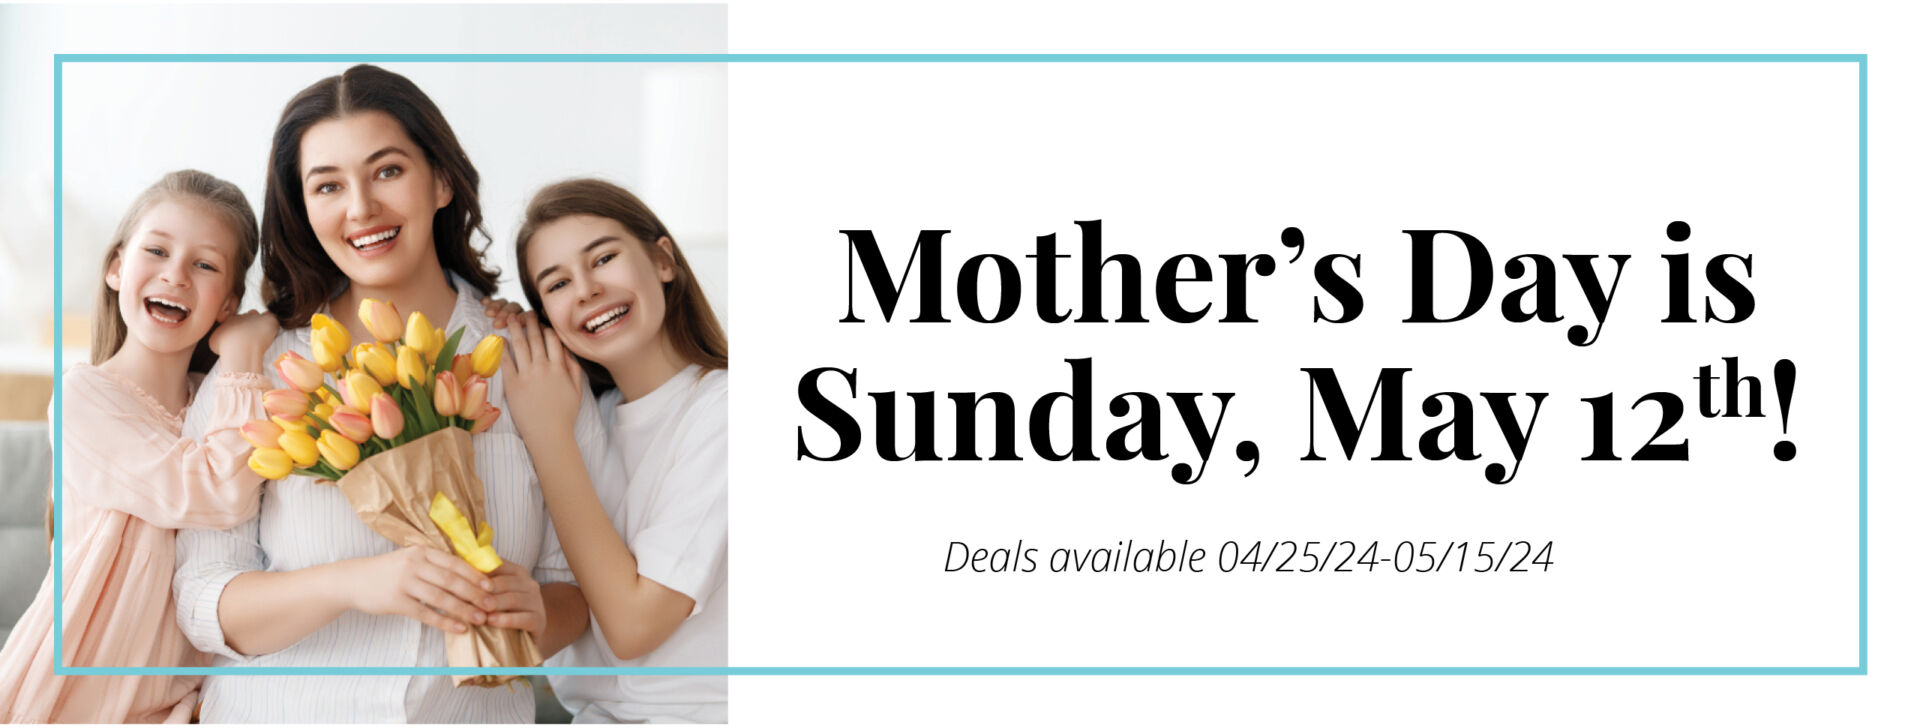 TDS001_COMPS_PROMO_MothersDay_0519238